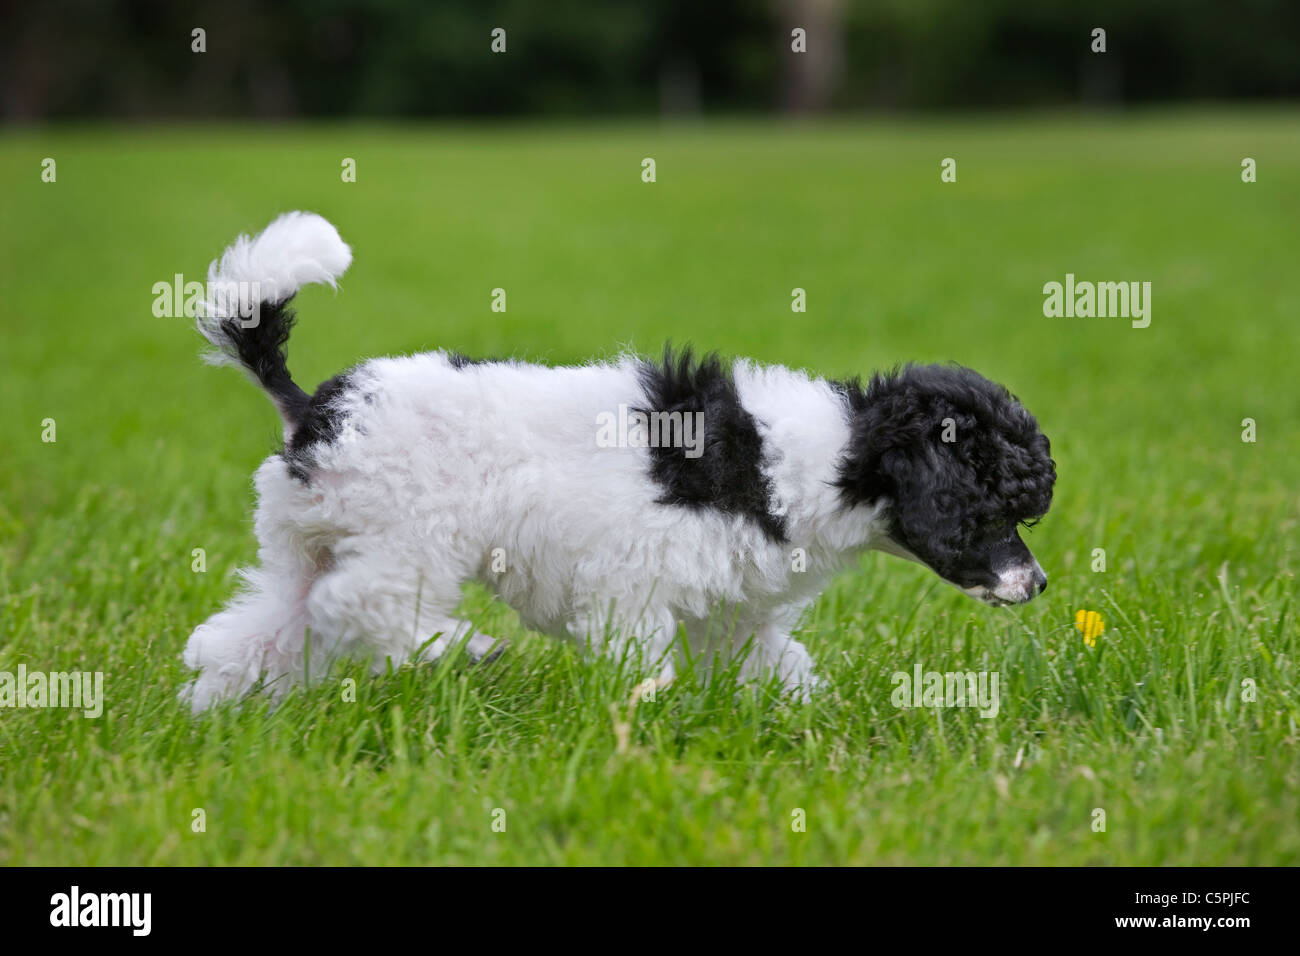 Black and white Miniature / Dwarf / Nain poodle (Canis lupus familiaris) sniffing at flower in garden Stock Photo